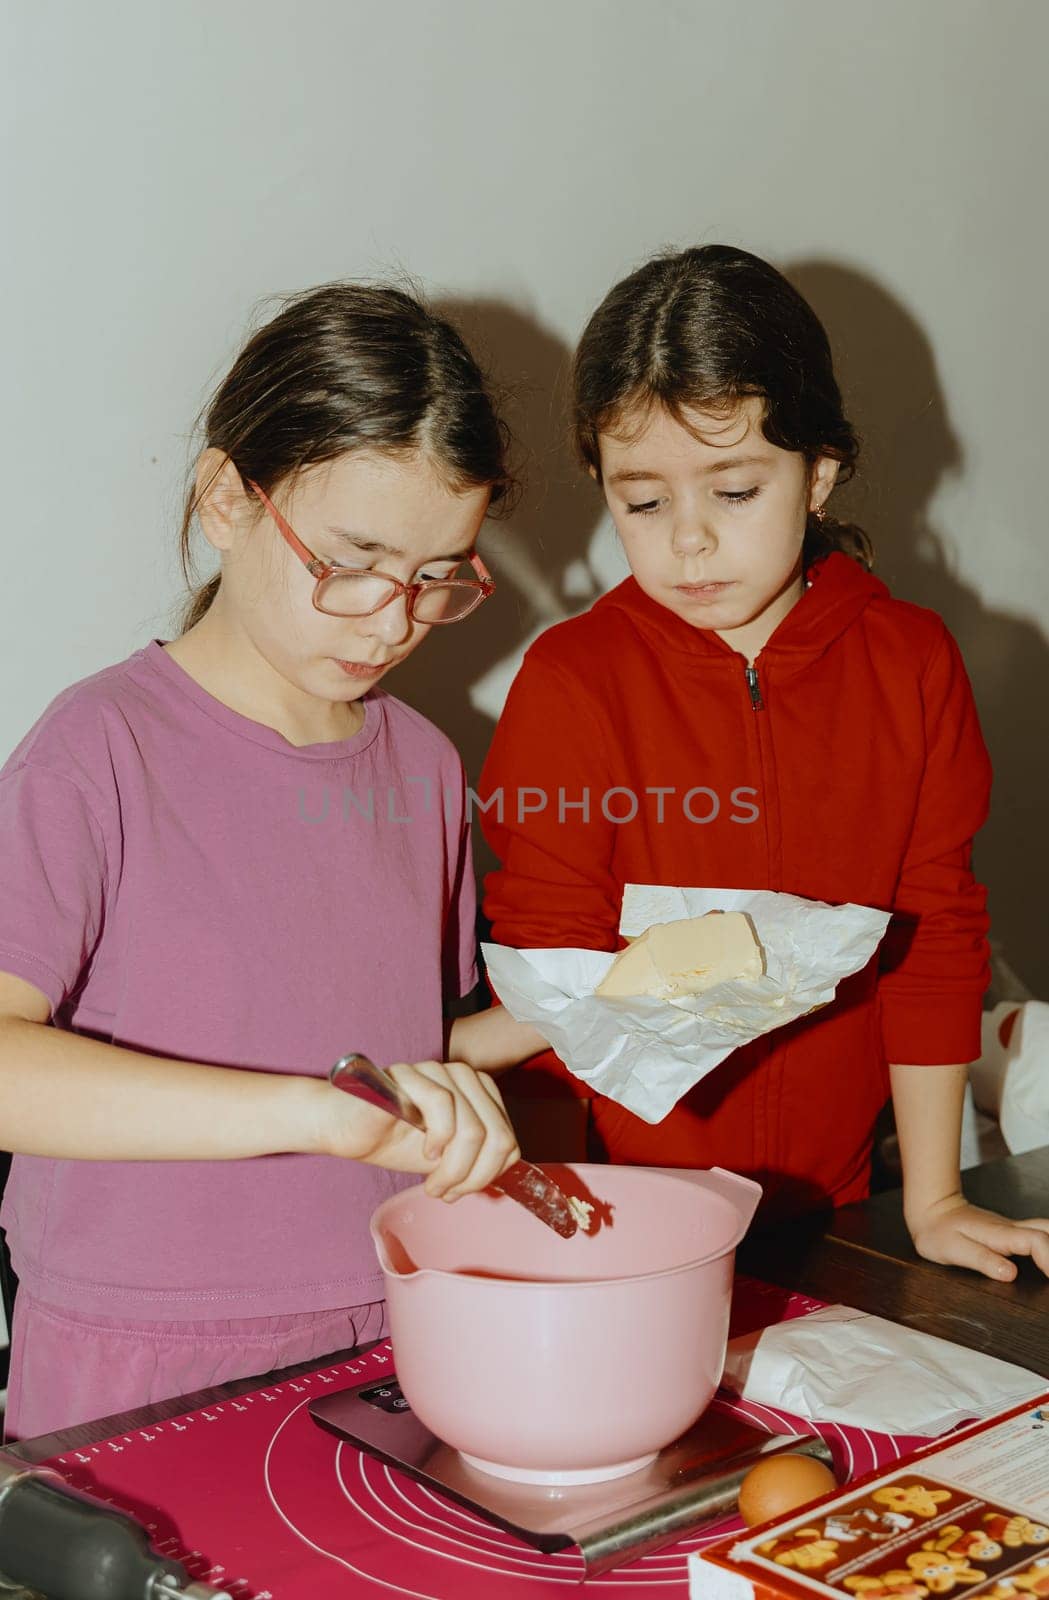 Two beautiful Caucasian brunette girls are standing at a table with food and one is cutting a piece of butter into a bowl for baking cookies, standing at the table in the kitchen during the day, close-up side view. Step-by-step instructions. Step 2.